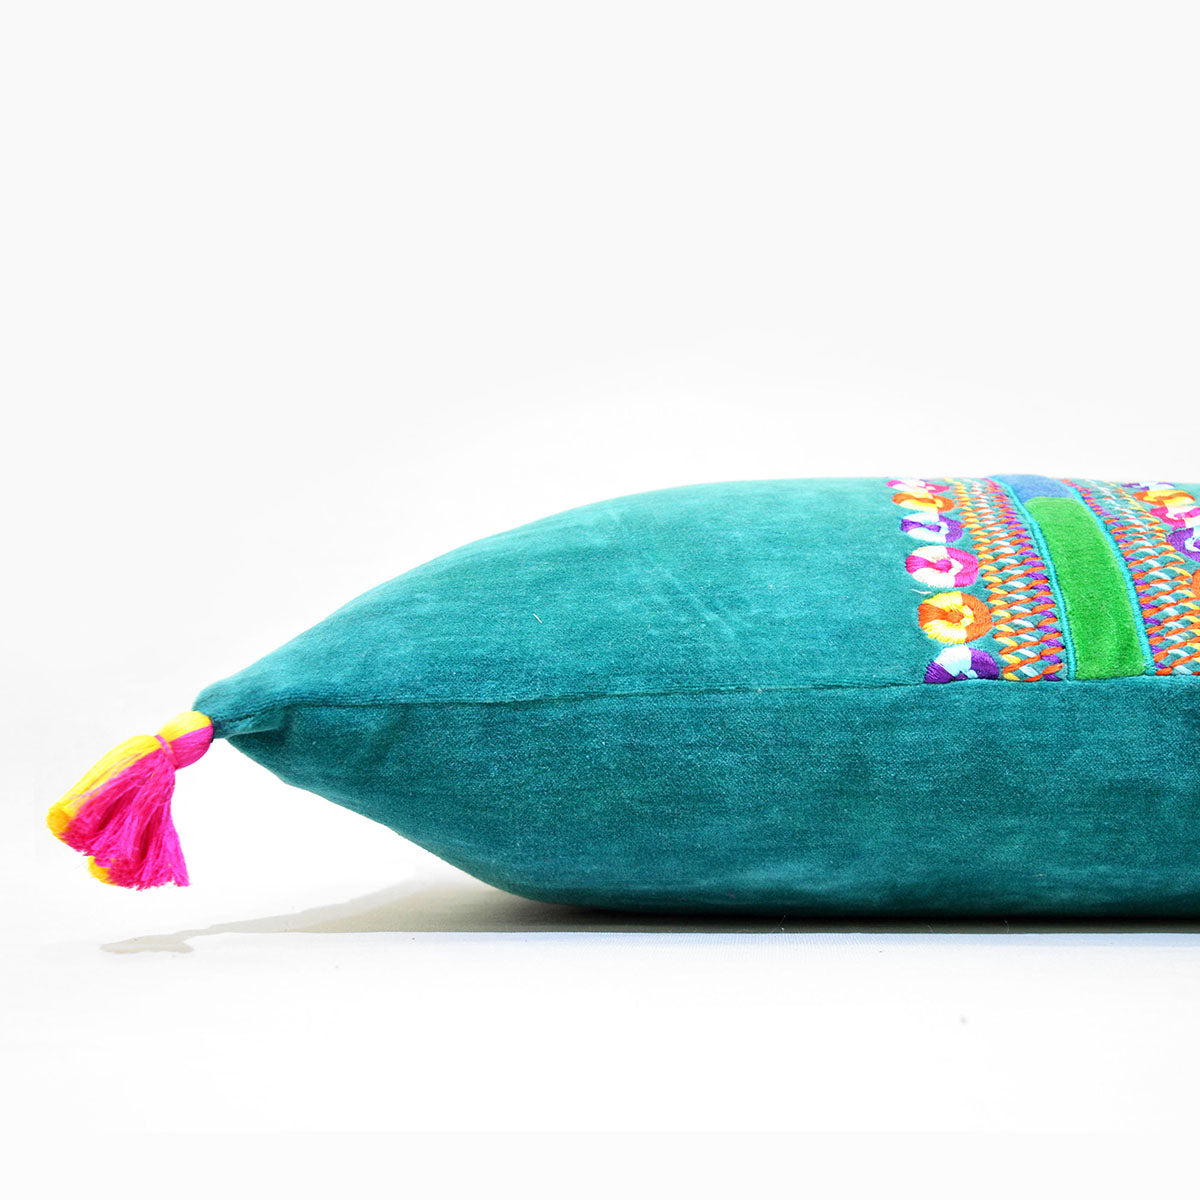 Carnival - Teal pillow cover, multicolor hand embroidery, bohemian oblong cushion cover